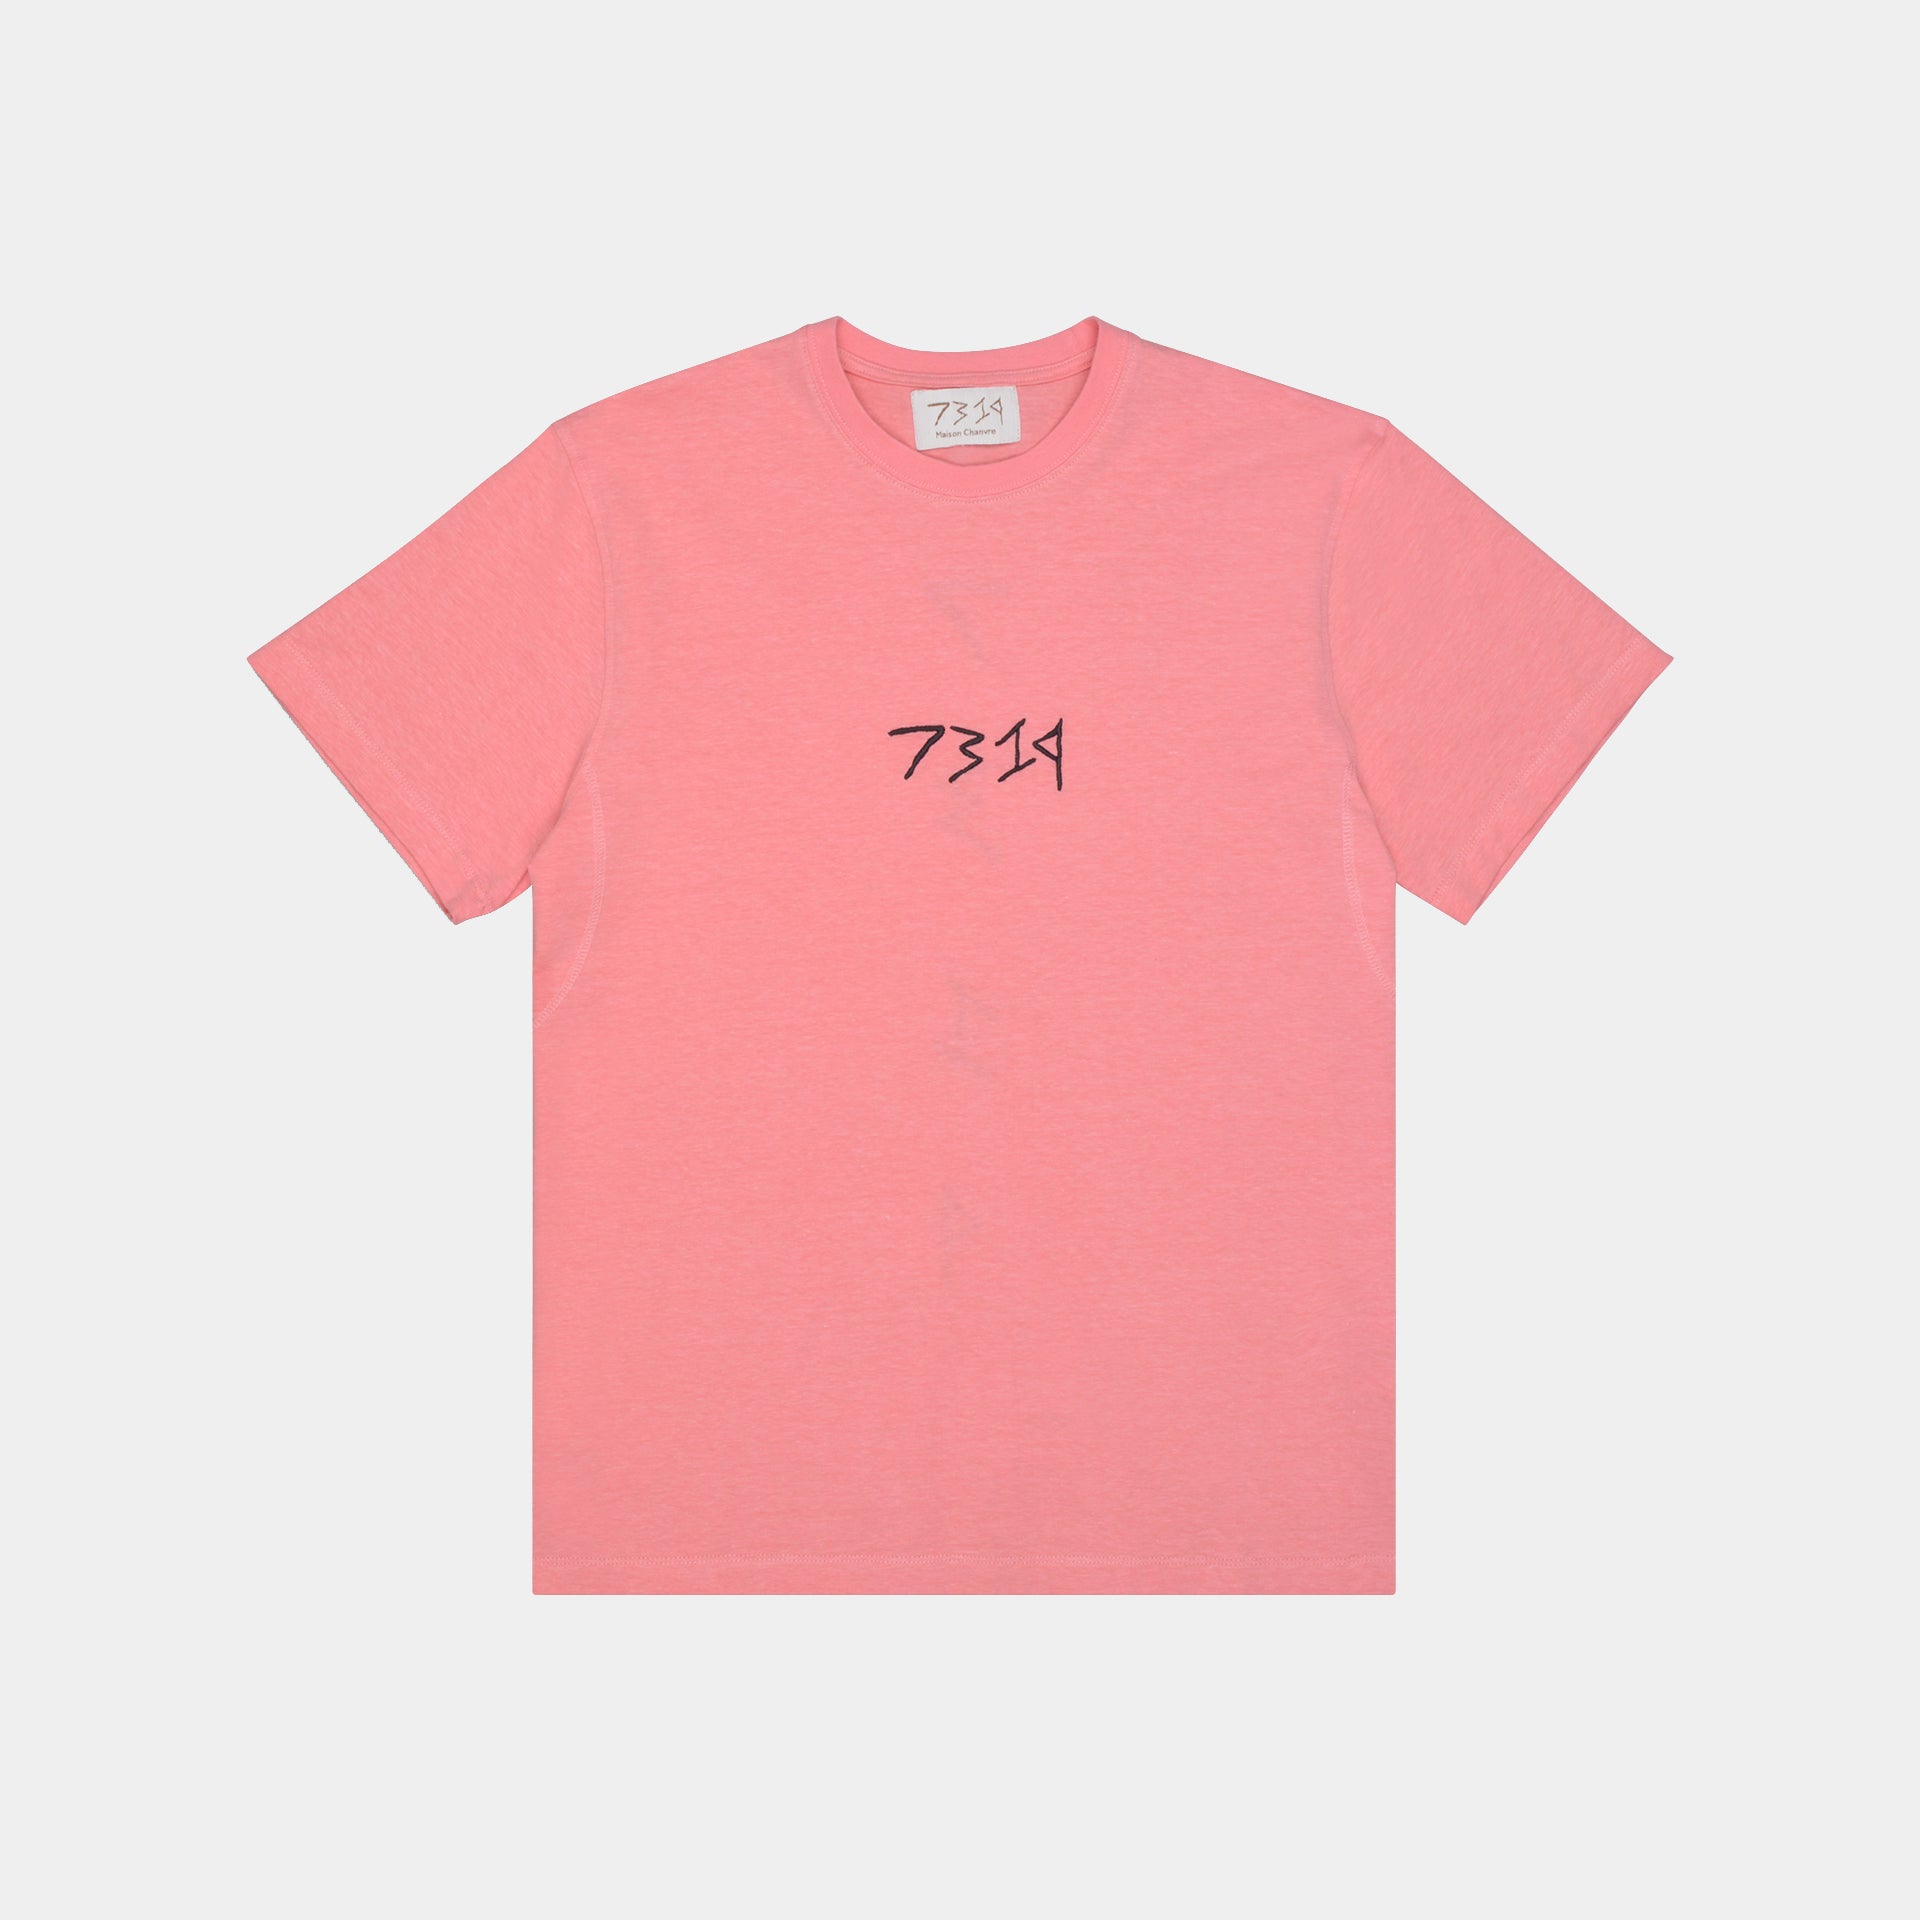 Pink hemp t-shirt. Black 7319 logo embroidered on front. Naturally soft and breathable material. Sustainable hemp fashion.